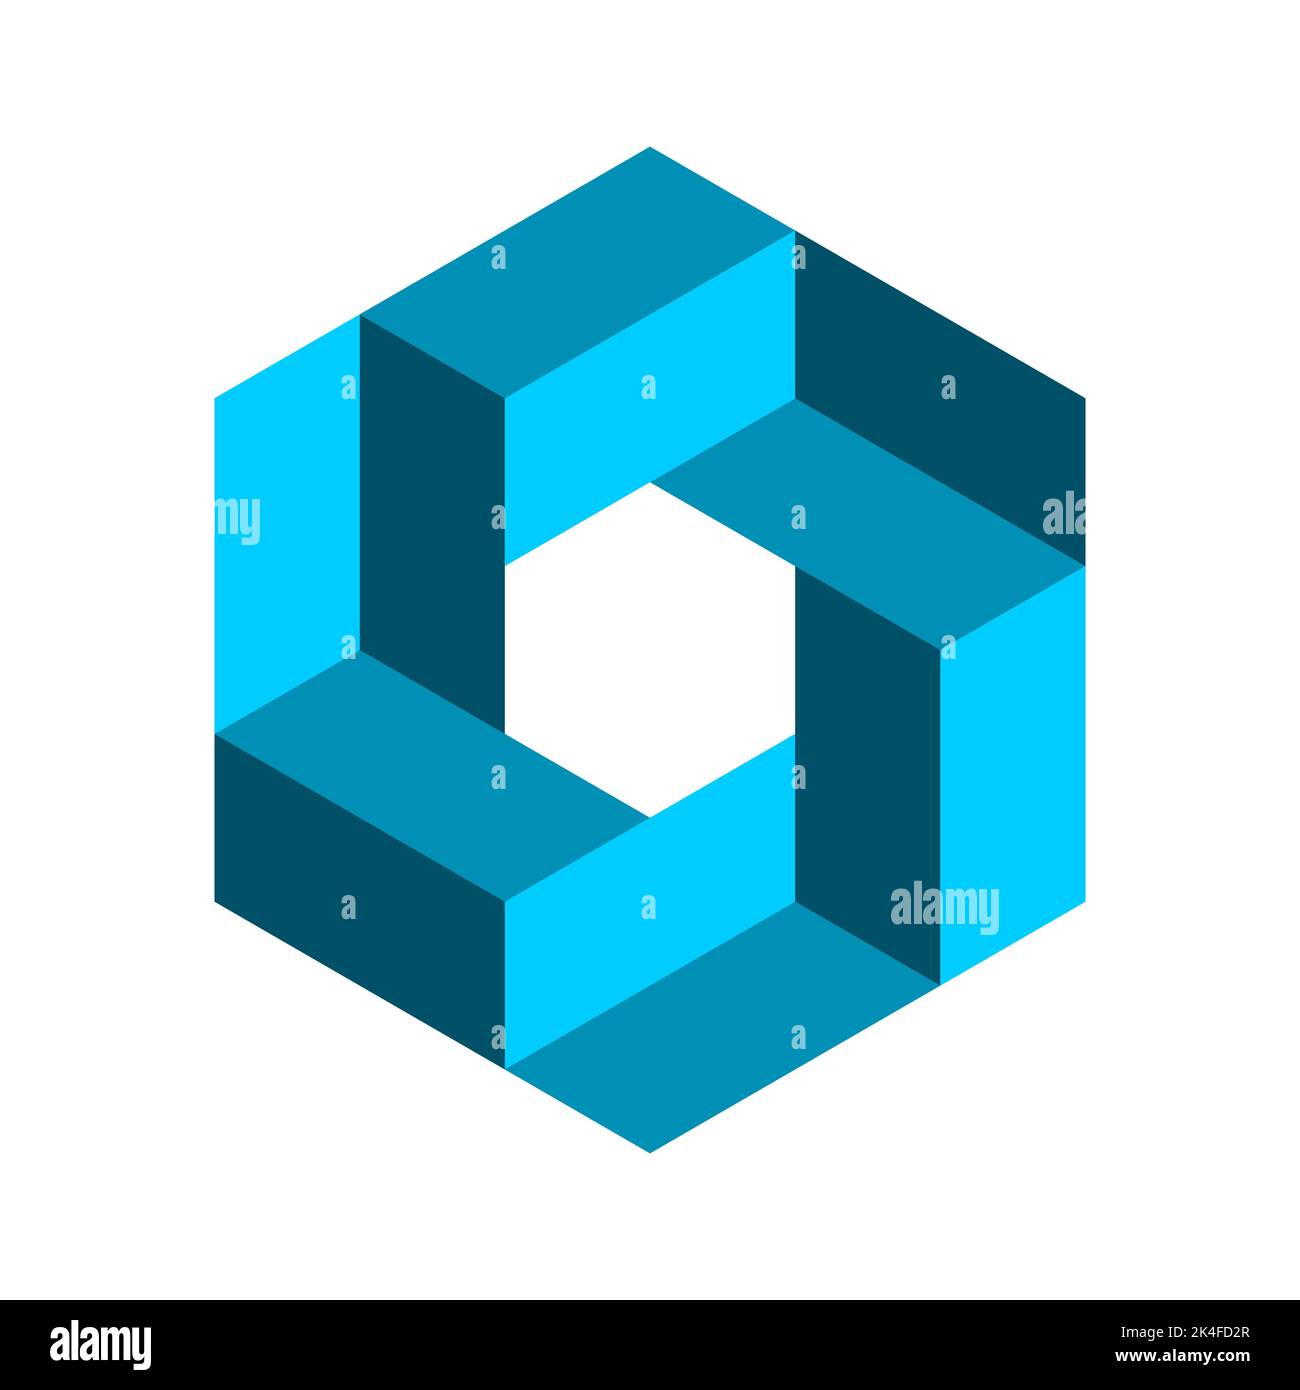 Blue impossible hexagon symbol. Penrose geometric shape. Infinity, endless concept. Esher geometric object made of 3D rectangles. Vector Stock Vector